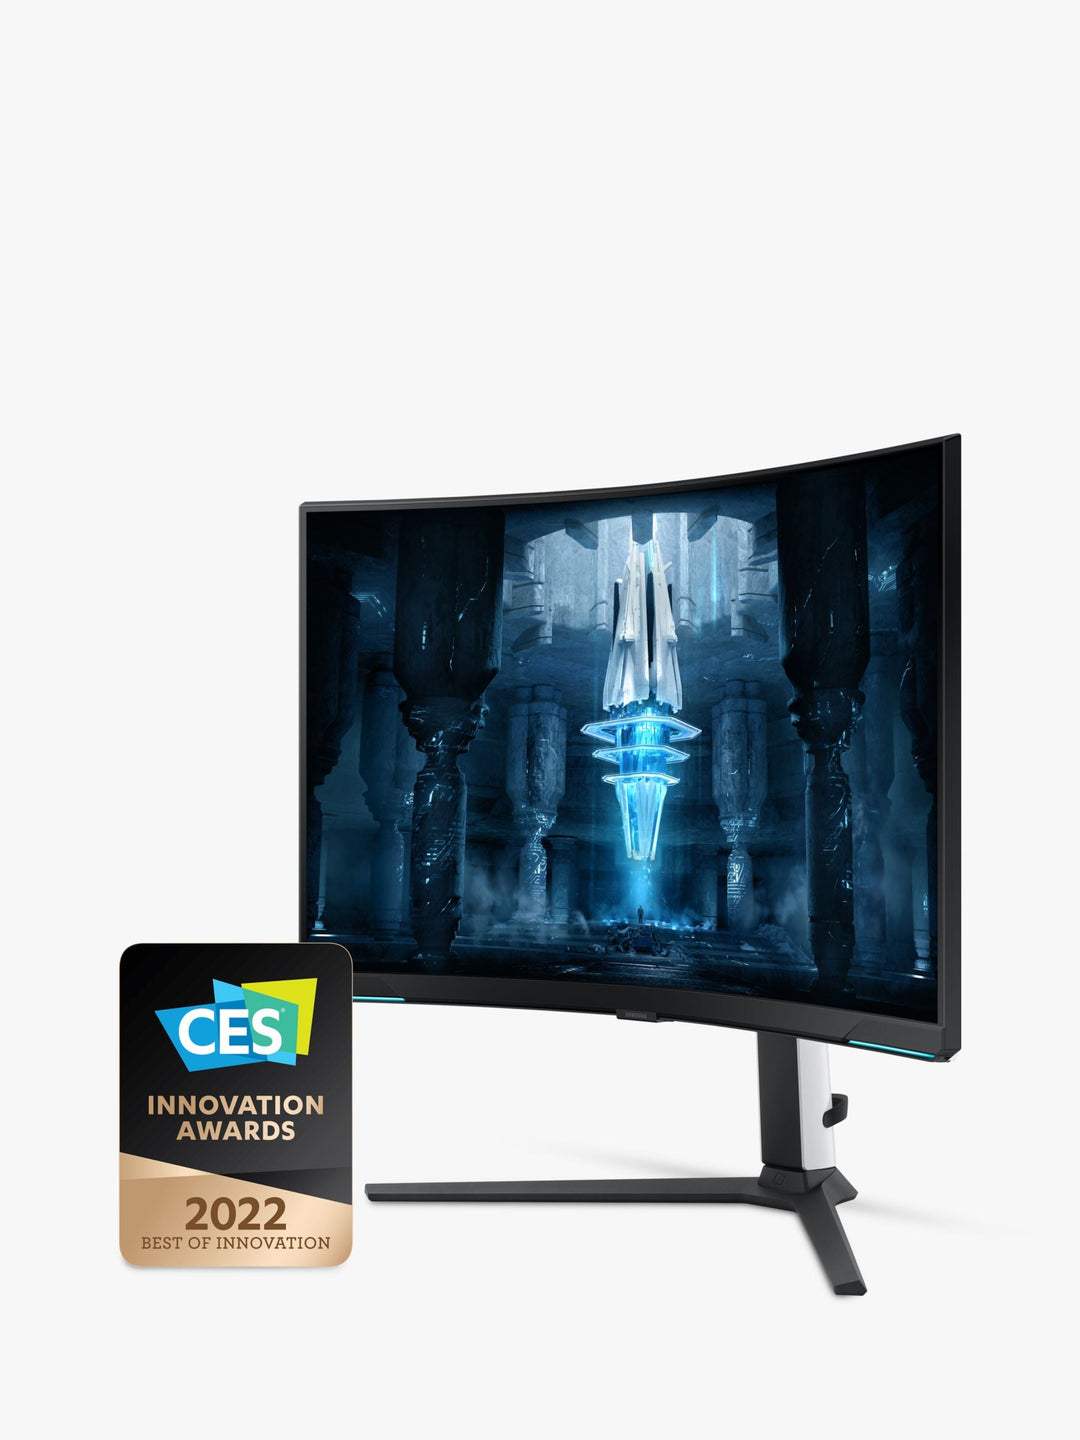 Samsung 4K UHD Curved Gaming Monitor, Quantum HDR 2000, 240Hz Refresh Rate, 1ms Response Time, Nvidia G-Sync Compatible, Matte Screen